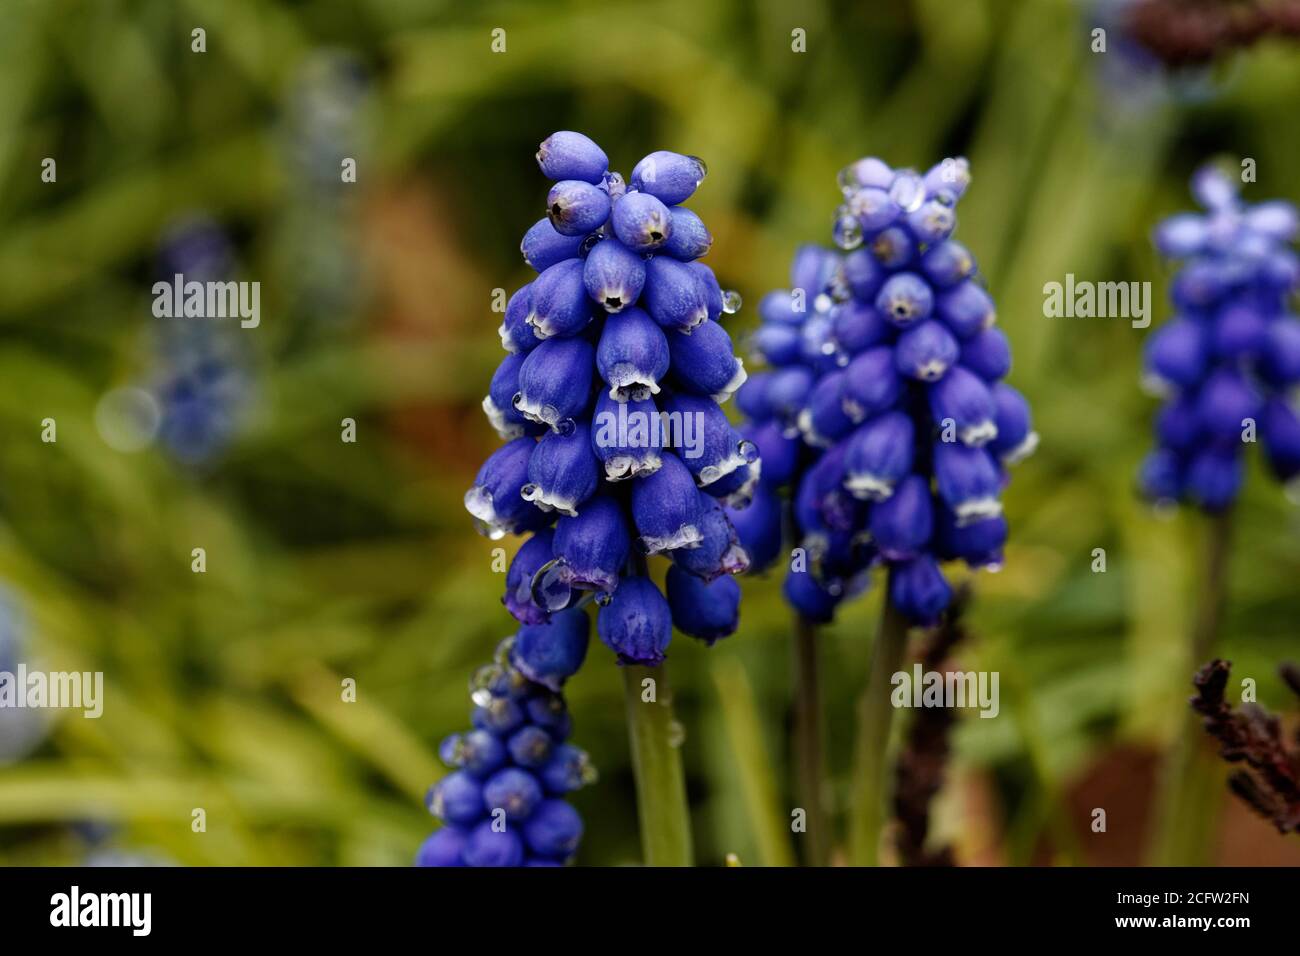 Muscari botryoides is a bulbous perennial plant of the genus Muscari and one of a number of species and genera known as grape hyacinth. Stock Photo